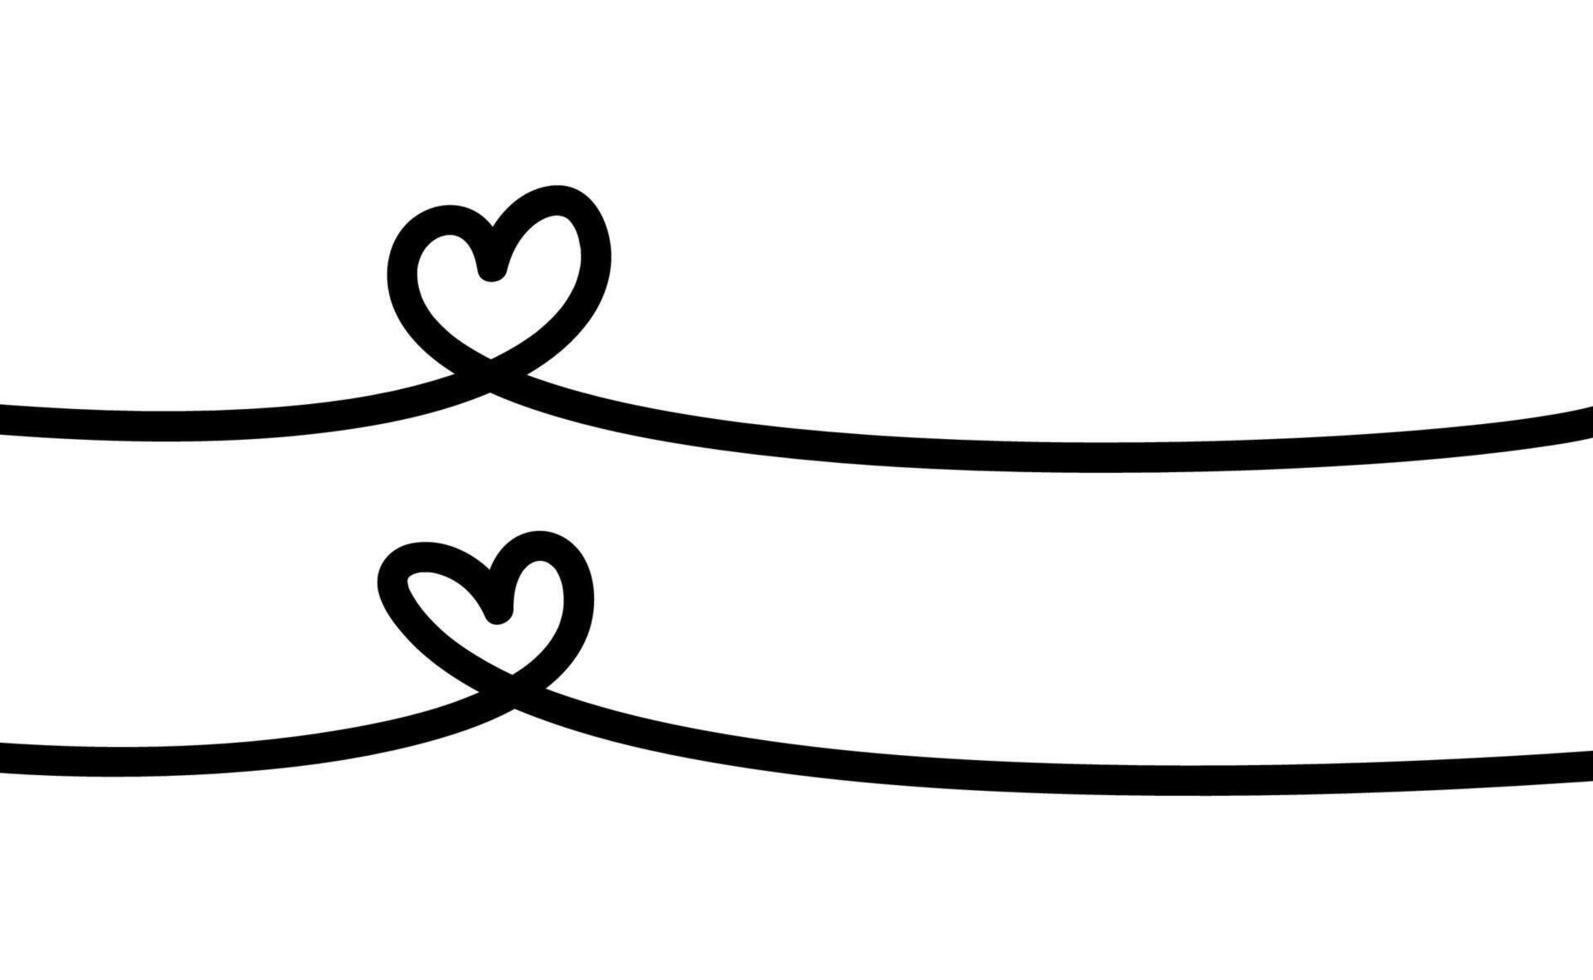 Heart shape. Continuous linear art doodle drawing vector illustration. Love one line symbol.